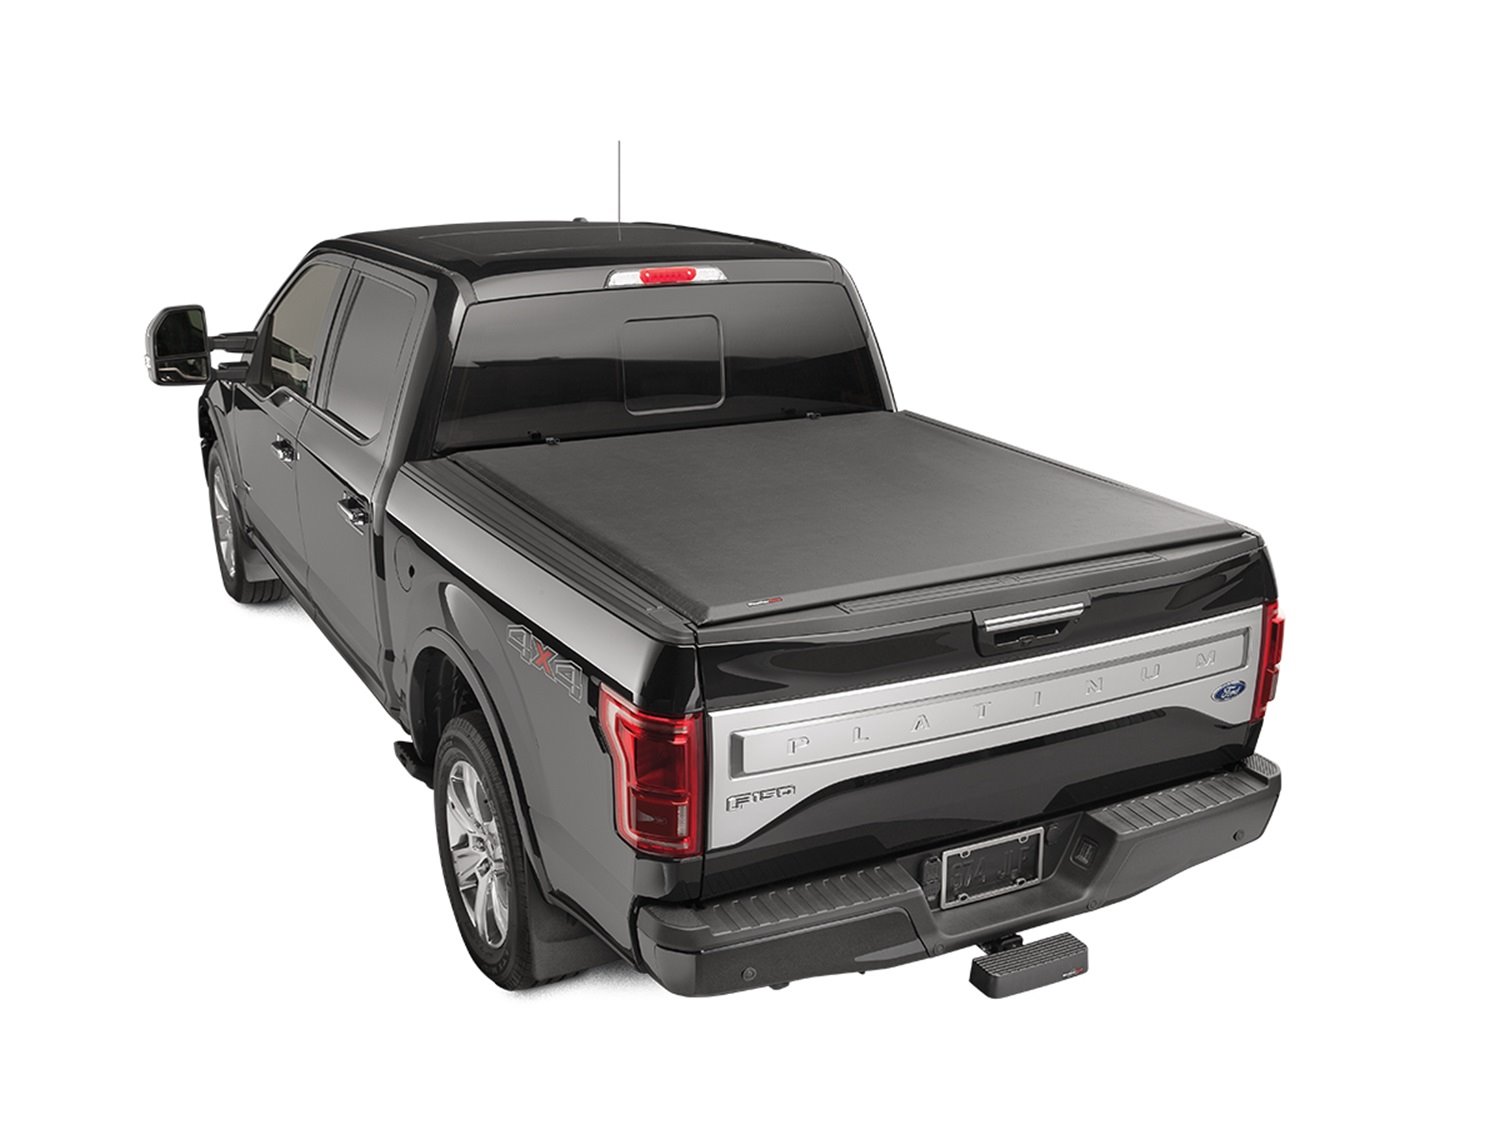 ROLL UP TRUCK BED COVER B TOYOTA TUNDRA 2007-2017 TUNDRA 6 6 BED W/ DECK RAIL